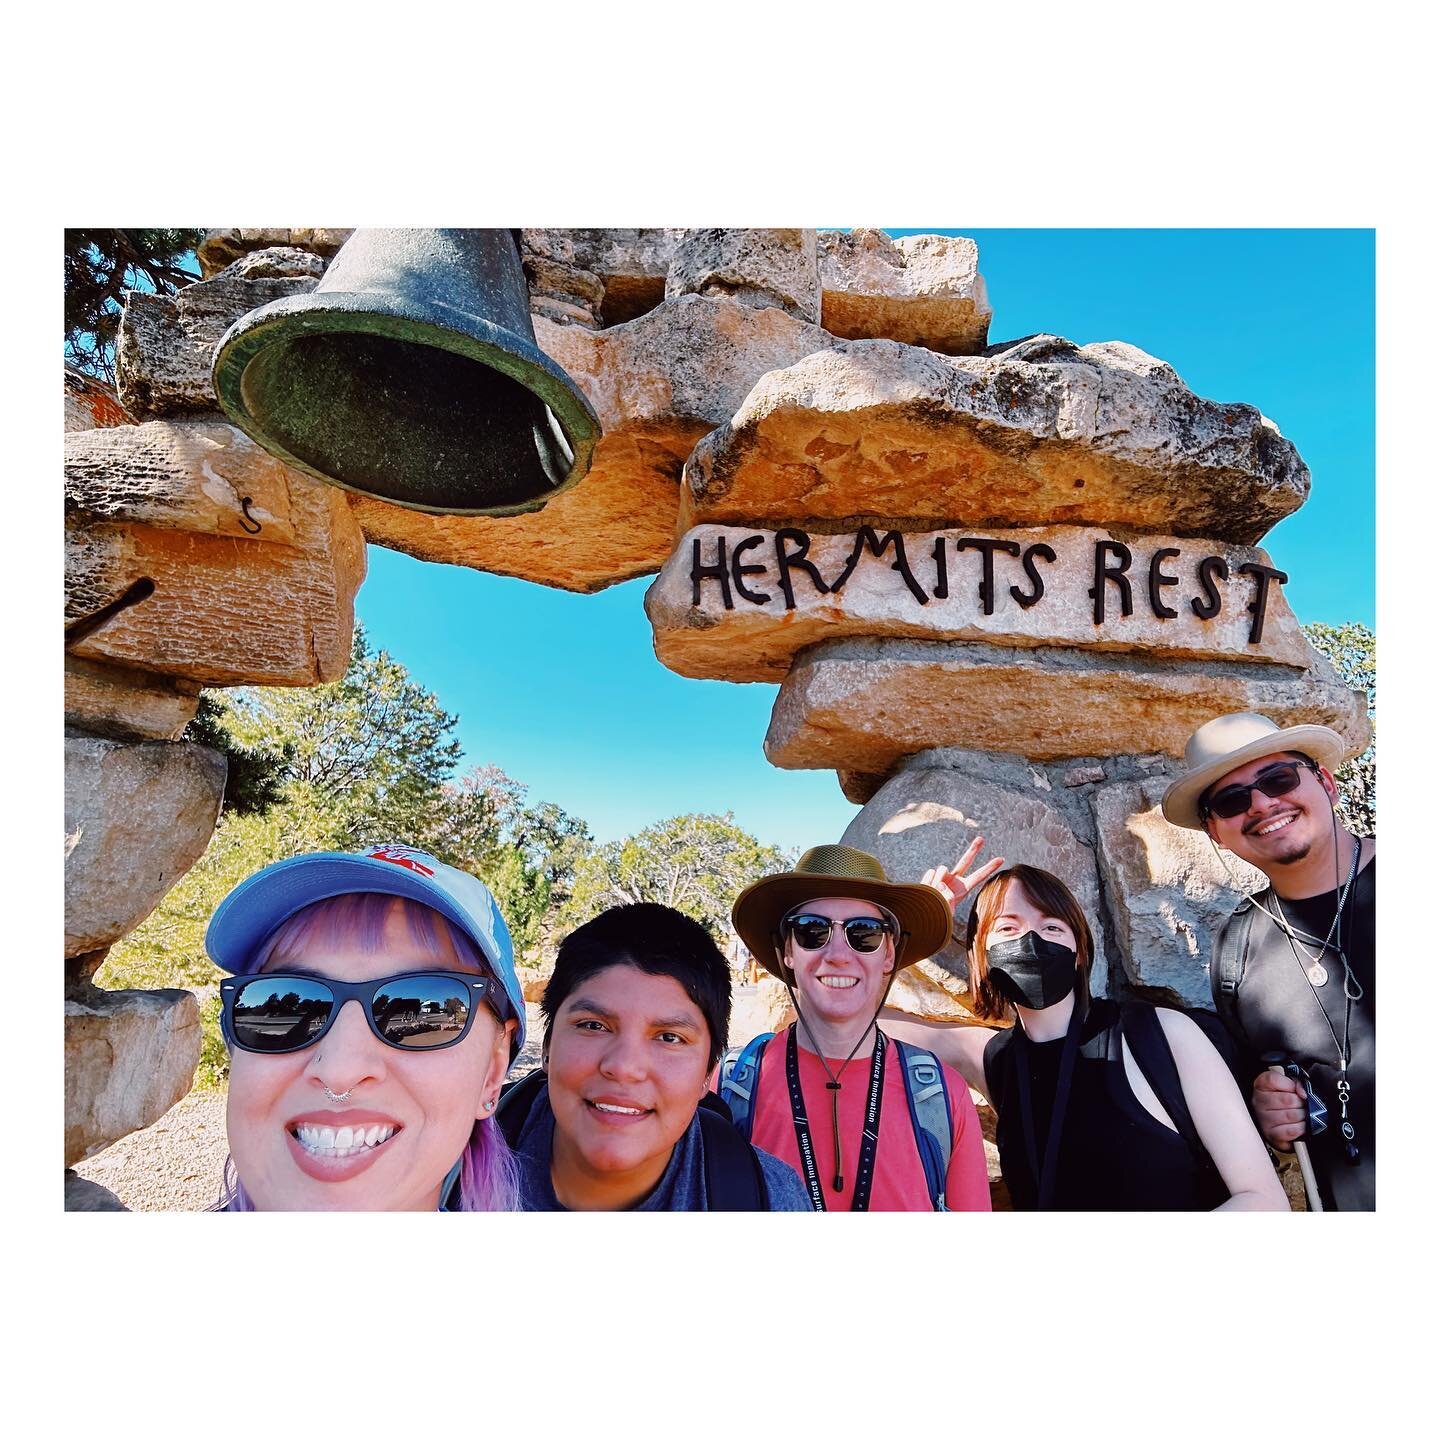 A few snapshots from hike day: a few of us decided to try Hermit&rsquo;s Rest to see some fossils in the Kaibab Limestone; also stopped at Powell Point and got a good look at the basement rocks. 
.
.
.
.
.
#grandcanyon #hrandcanyonnationalpark #hermi